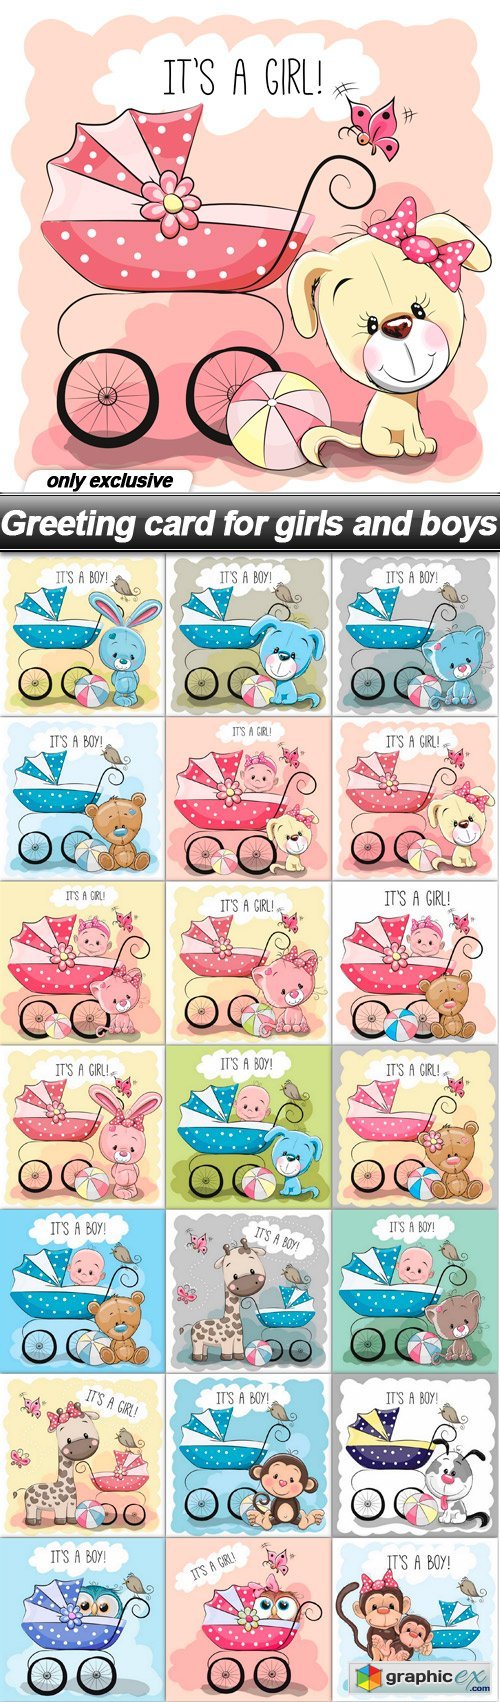 Greeting card for girls and boys - 21 EPS